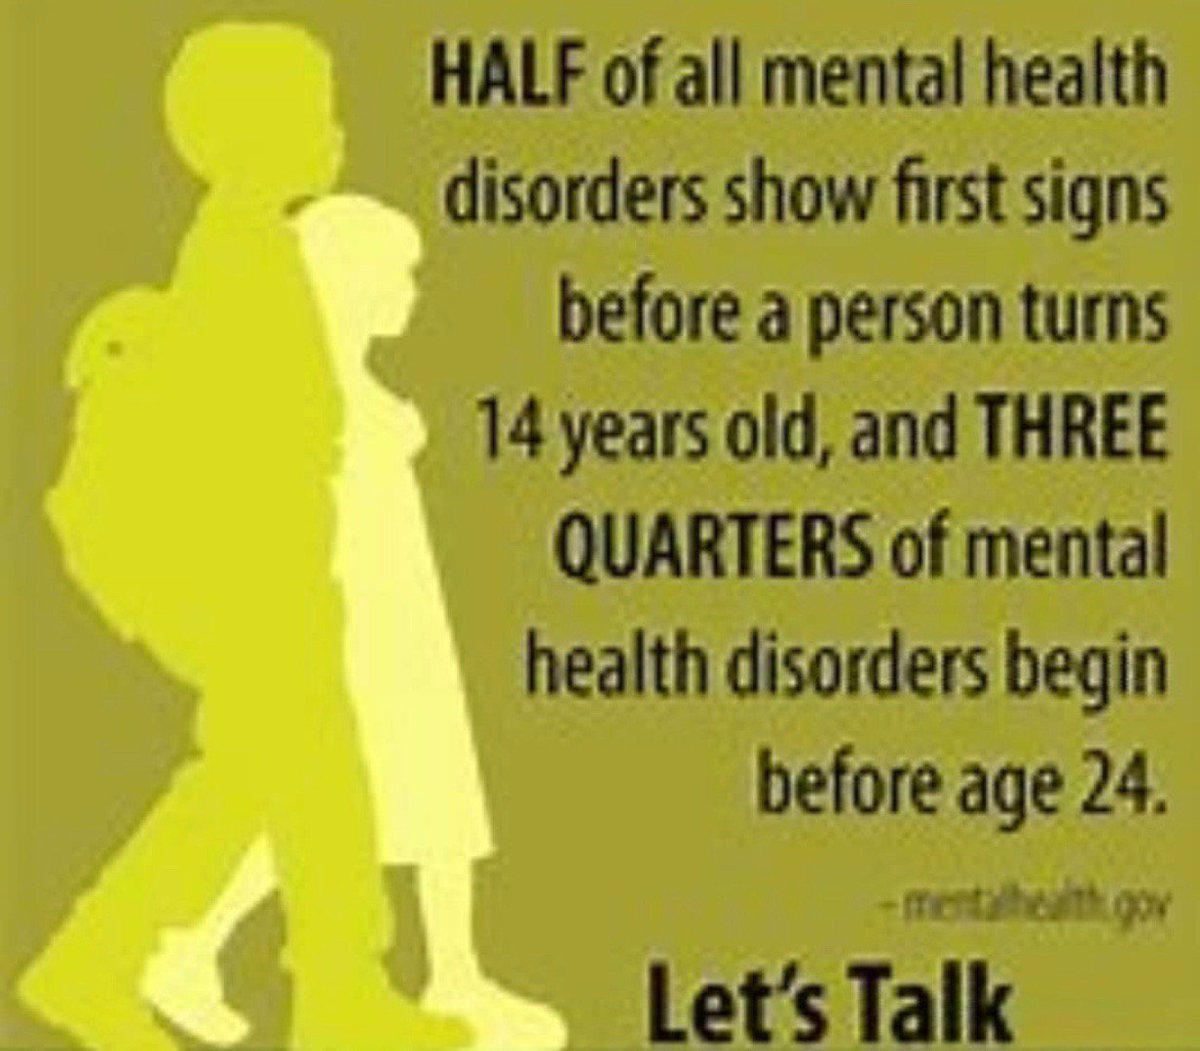 May is Mental Health Awareness Month. We must start making mental health a priority. No more stigma. No more shame. #letstalk #mentalhealthawarenessmonth #mentalhealthmatters #endthestigma #teensuicideawareness #teensuicideprevention #sayshutup #dontsufferinsilence #askforhelp